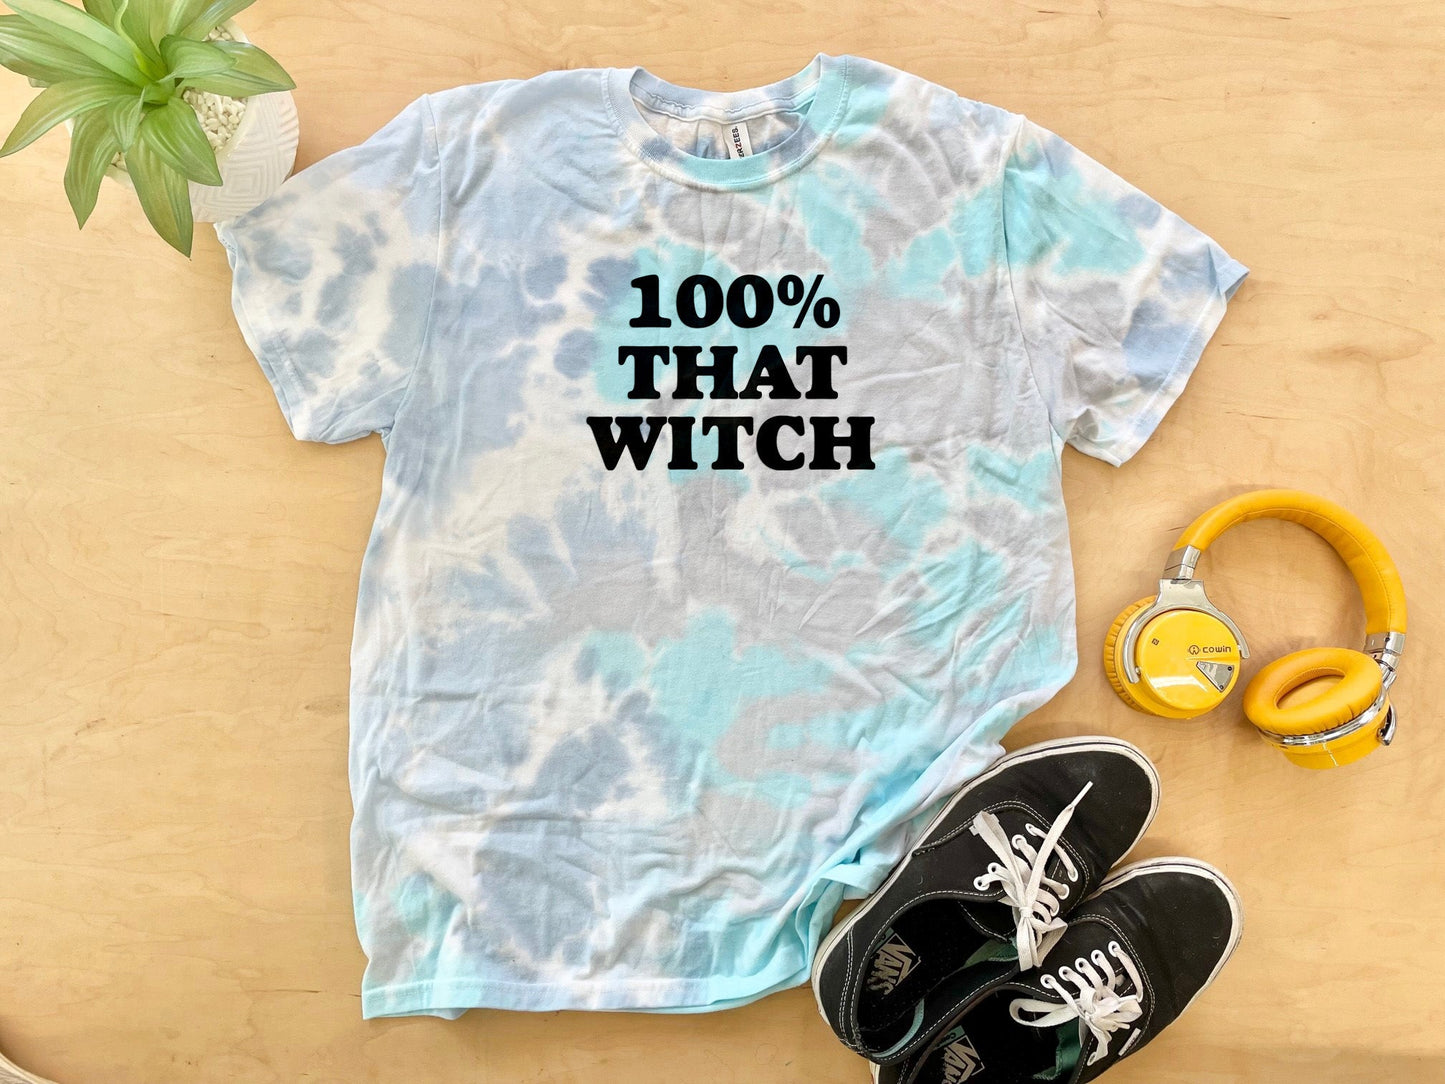 100% That Witch - Mens/Unisex Tie Dye Tee - Blue